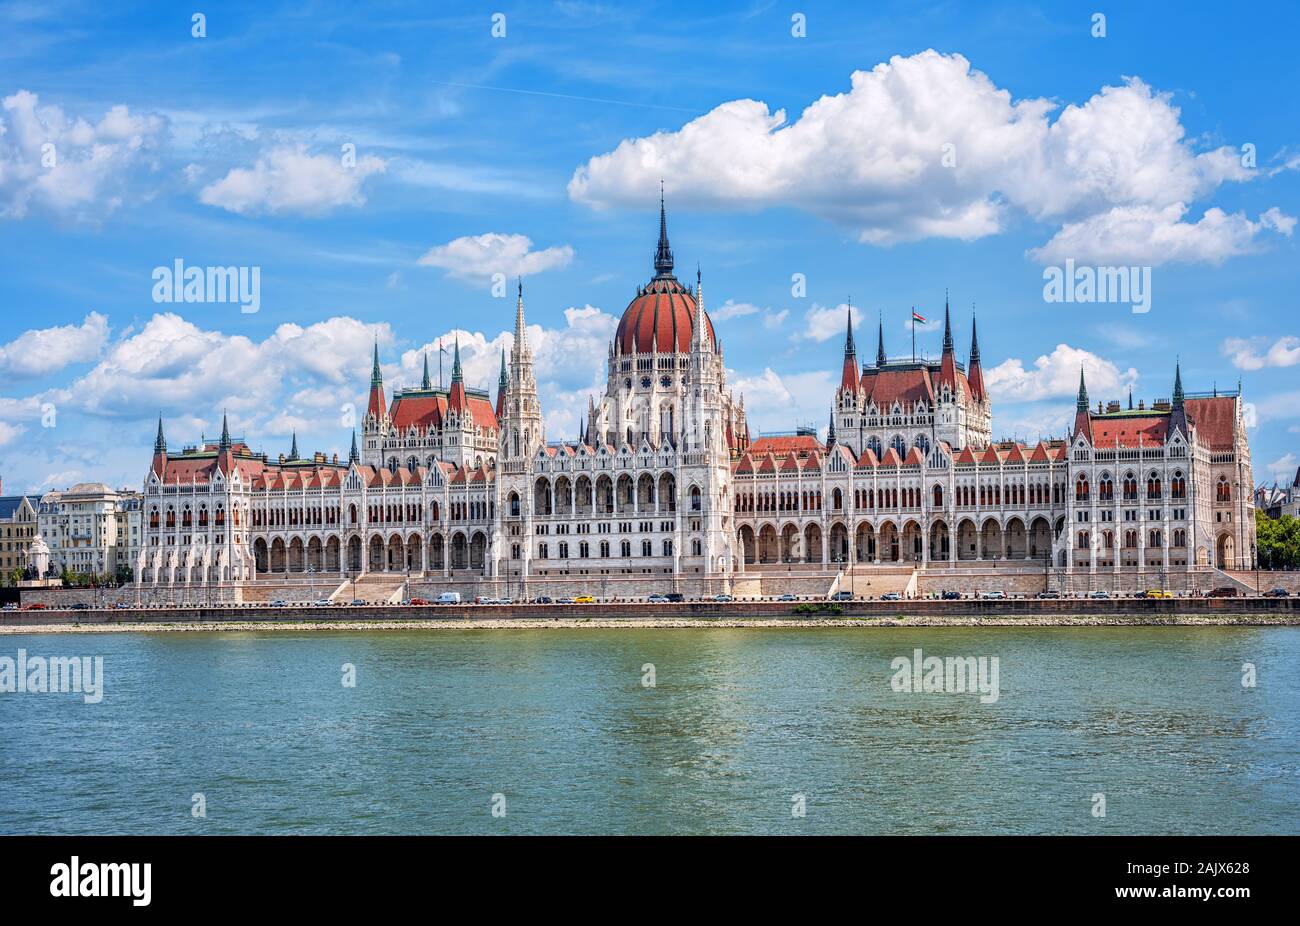 Budapest, Hungary, view of the beautiful Parliament building on Danube river, the main landmark of the city Stock Photo